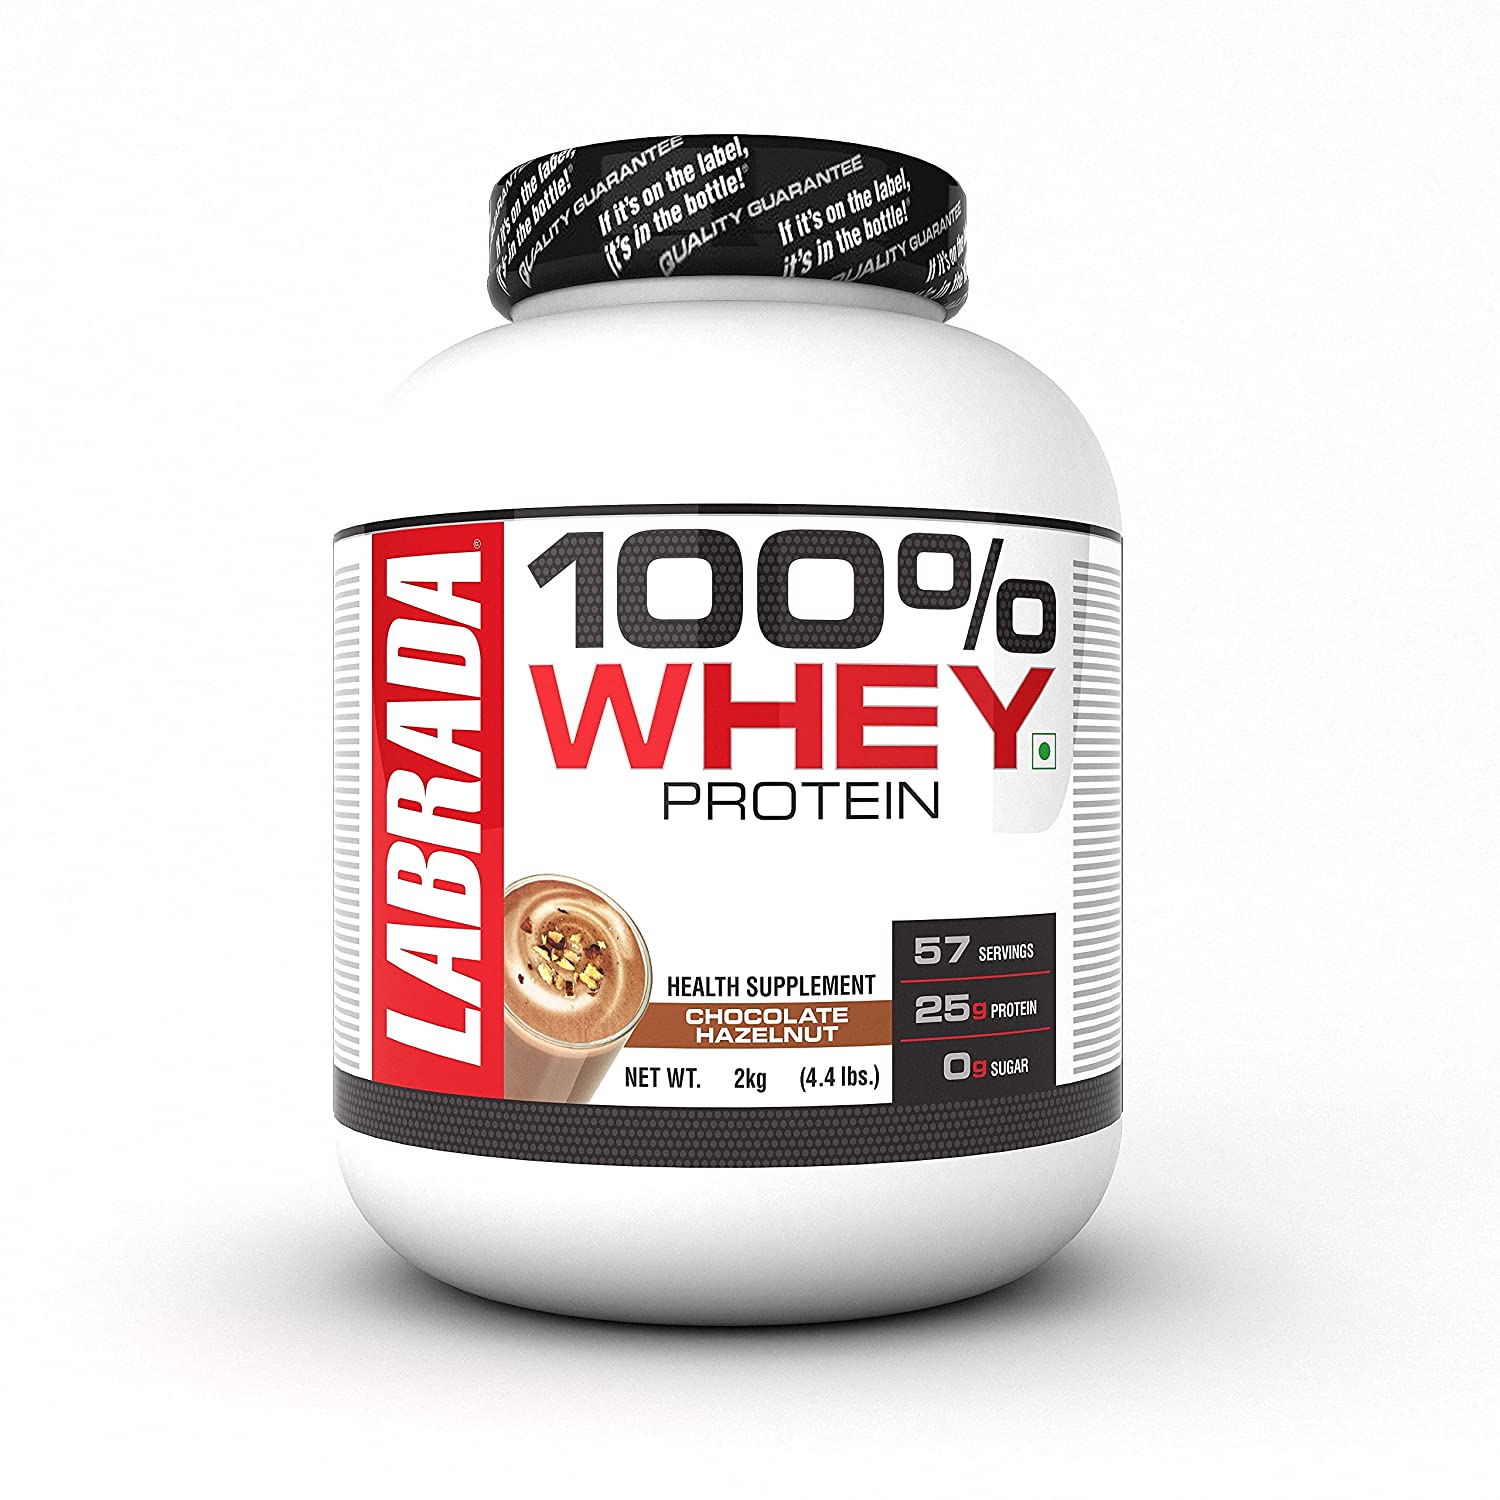 whey protein price in india 1kg